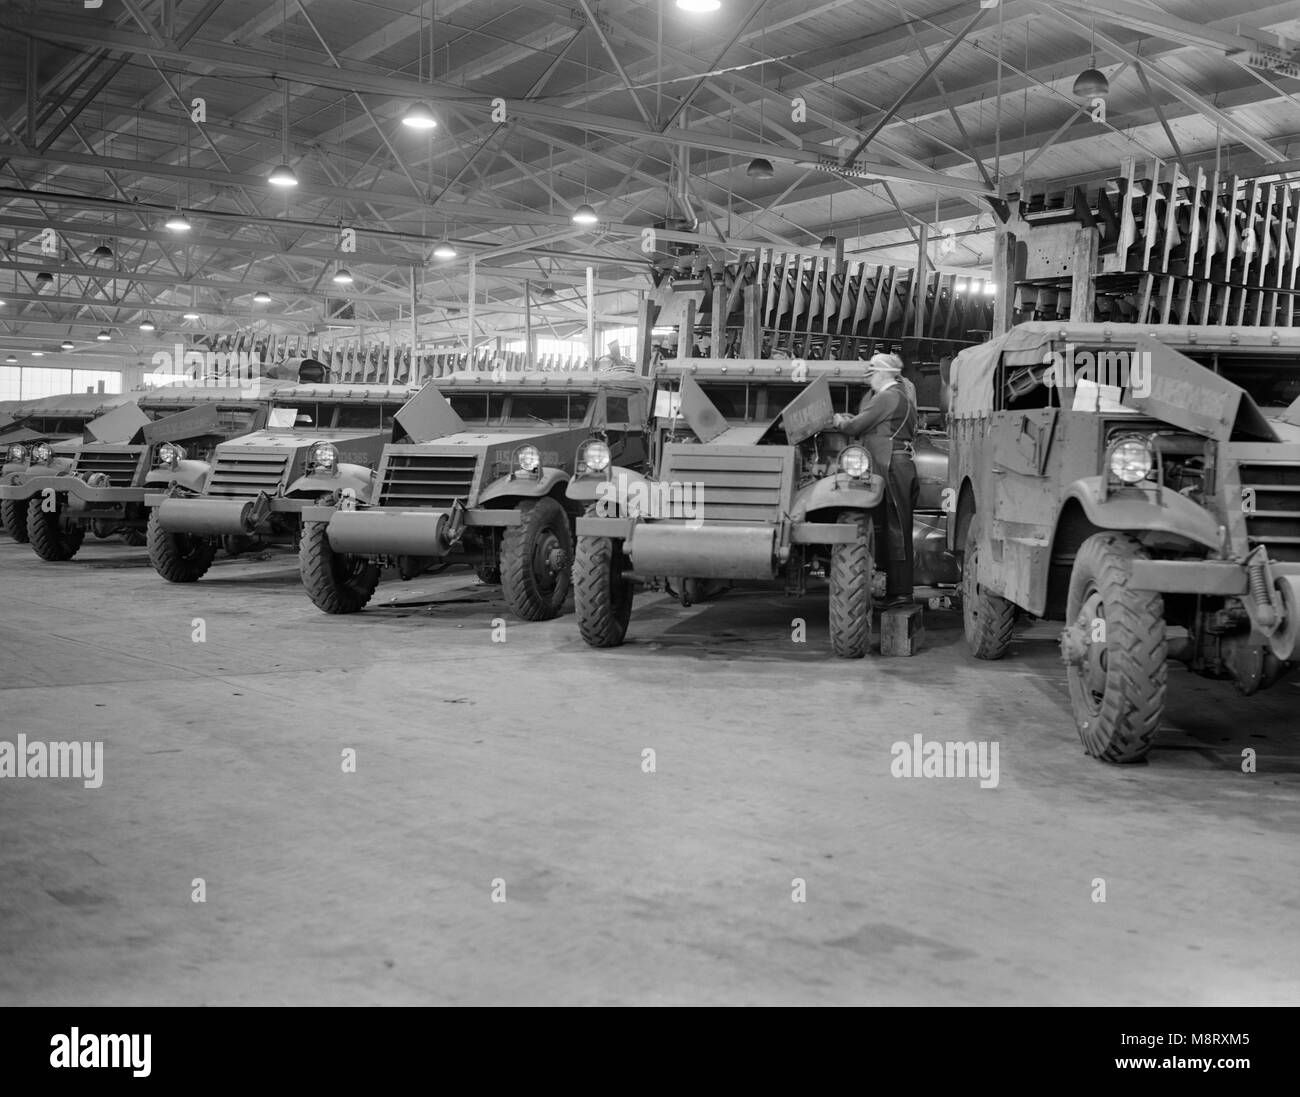 Army's Half-Track Scout Cars Ready for Delivery from Factory Converted to War Production, White Motor Company, Cleveland, Ohio, USA, Alfred T. Palmer for Office of War Information, December 1941 Stock Photo